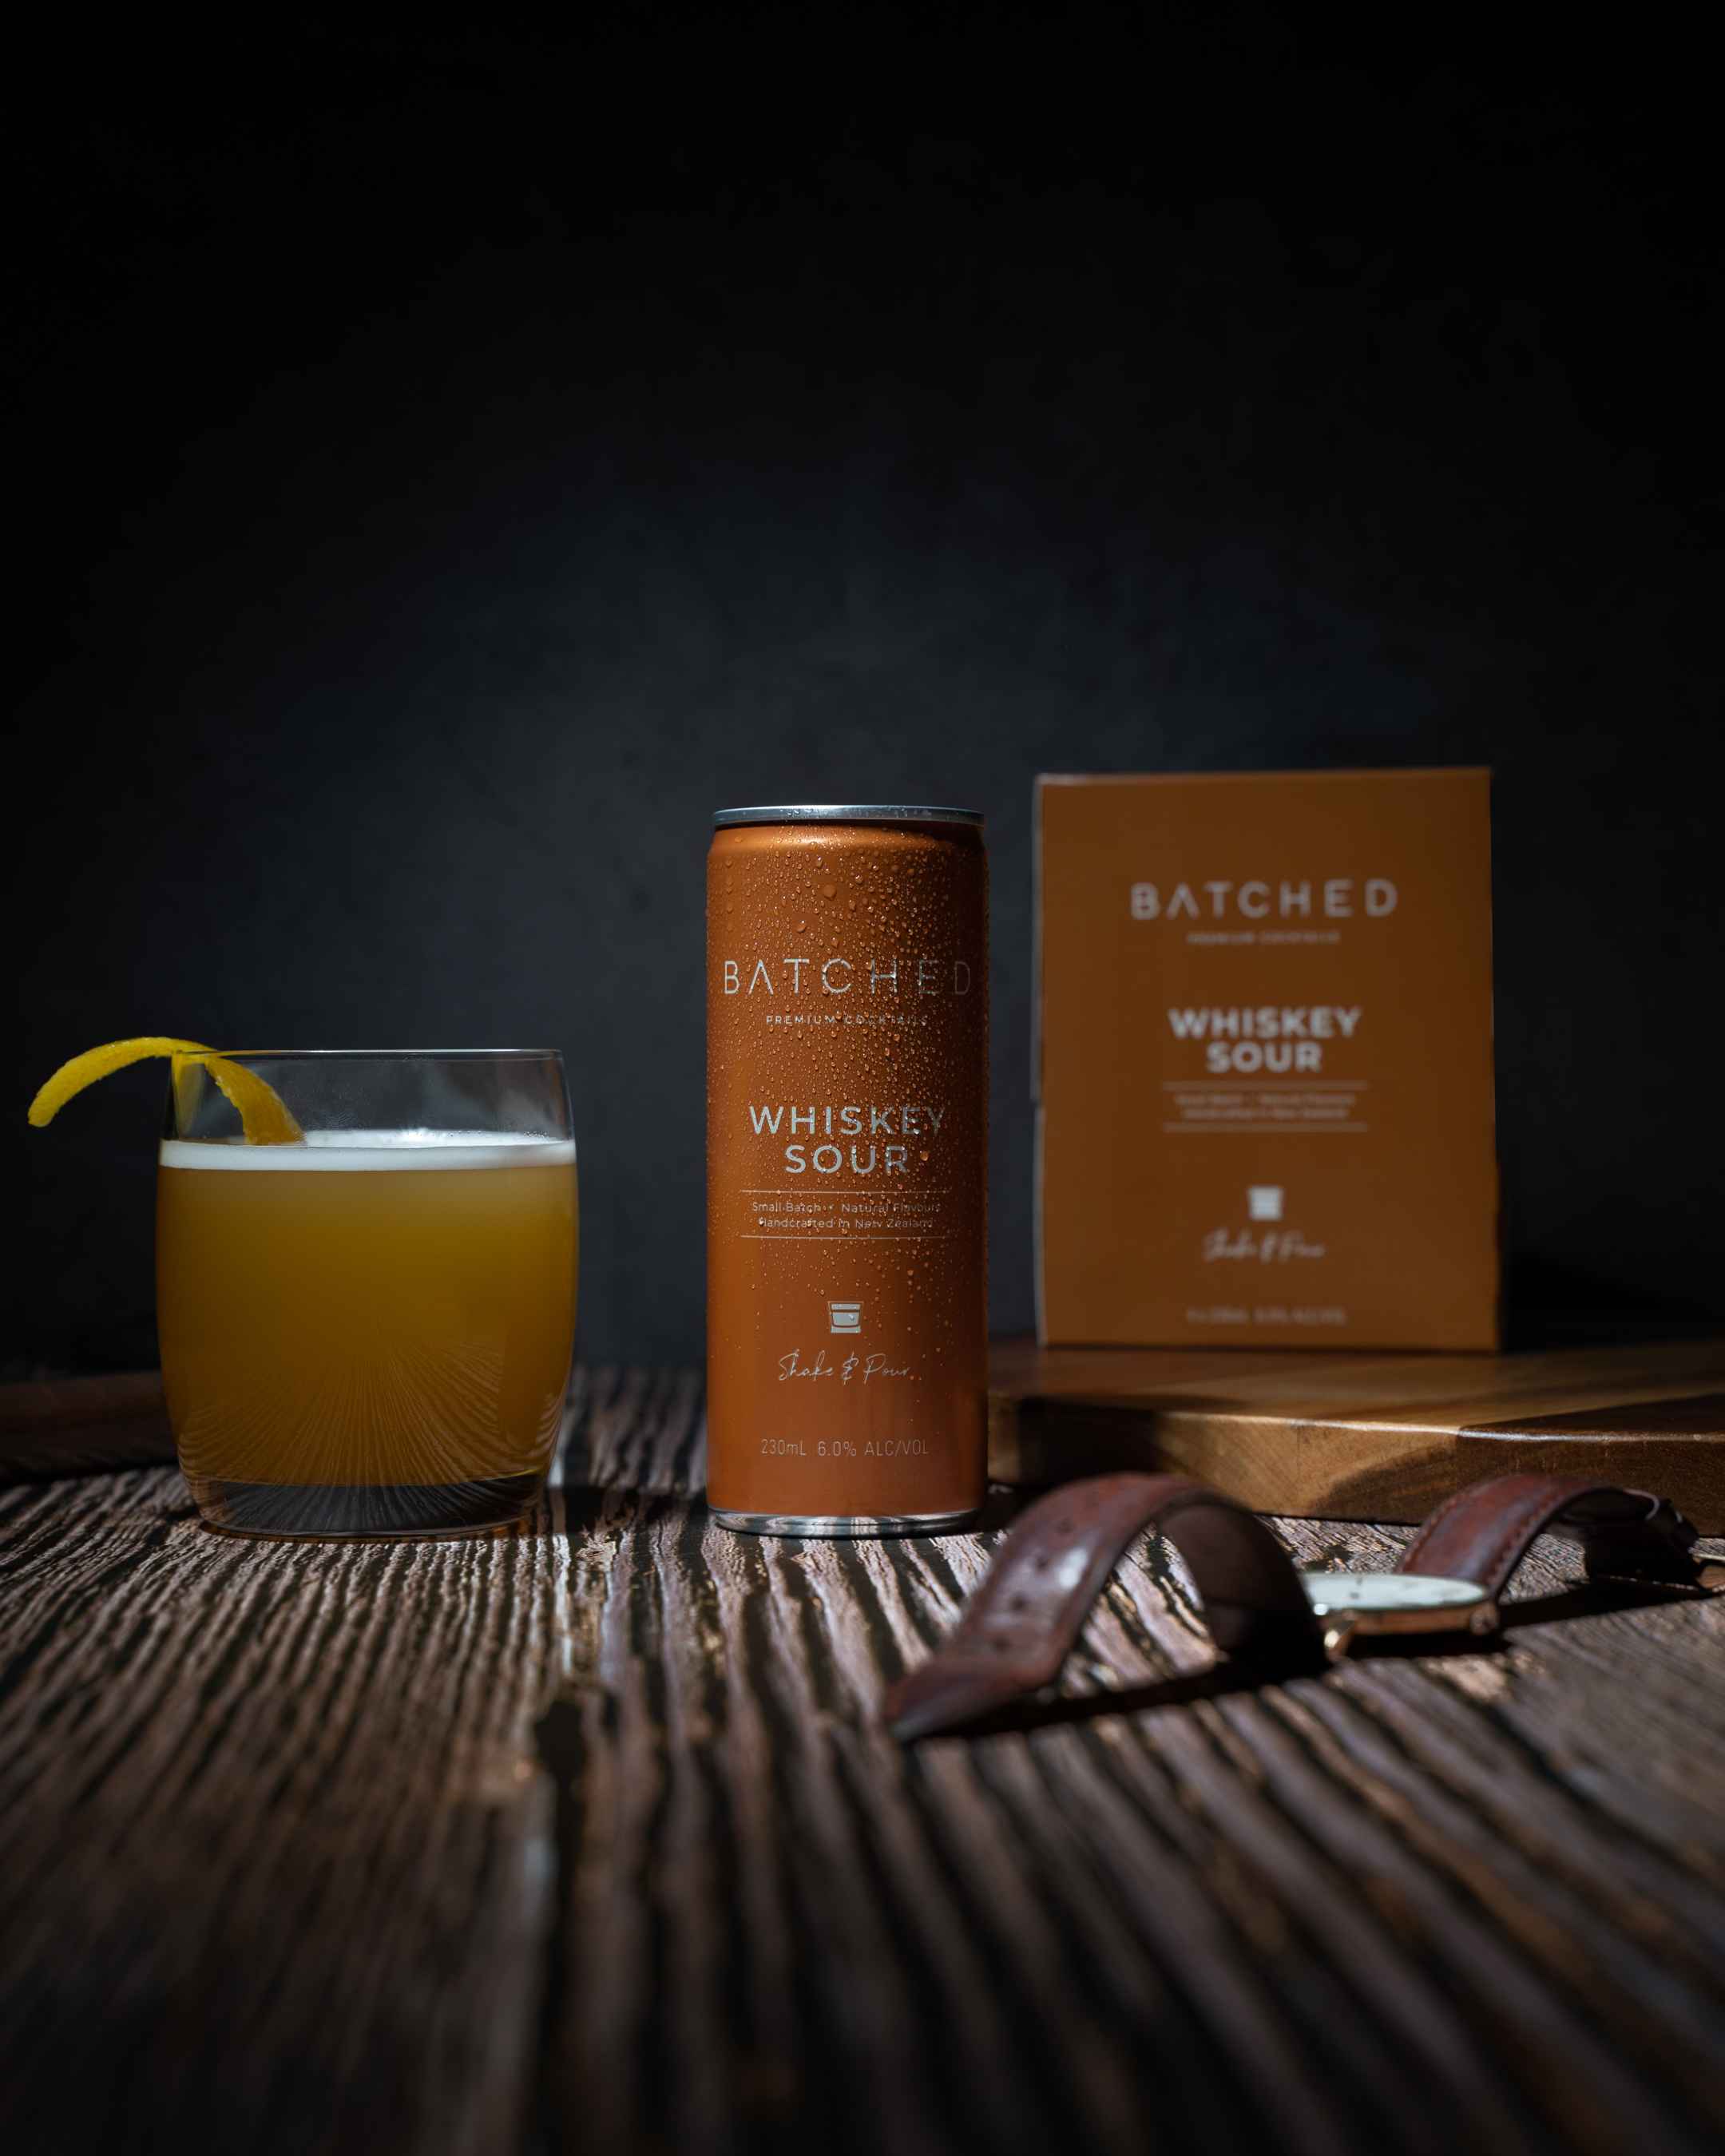 Can, box and glass of Batched Whiskey Sour on wooden table